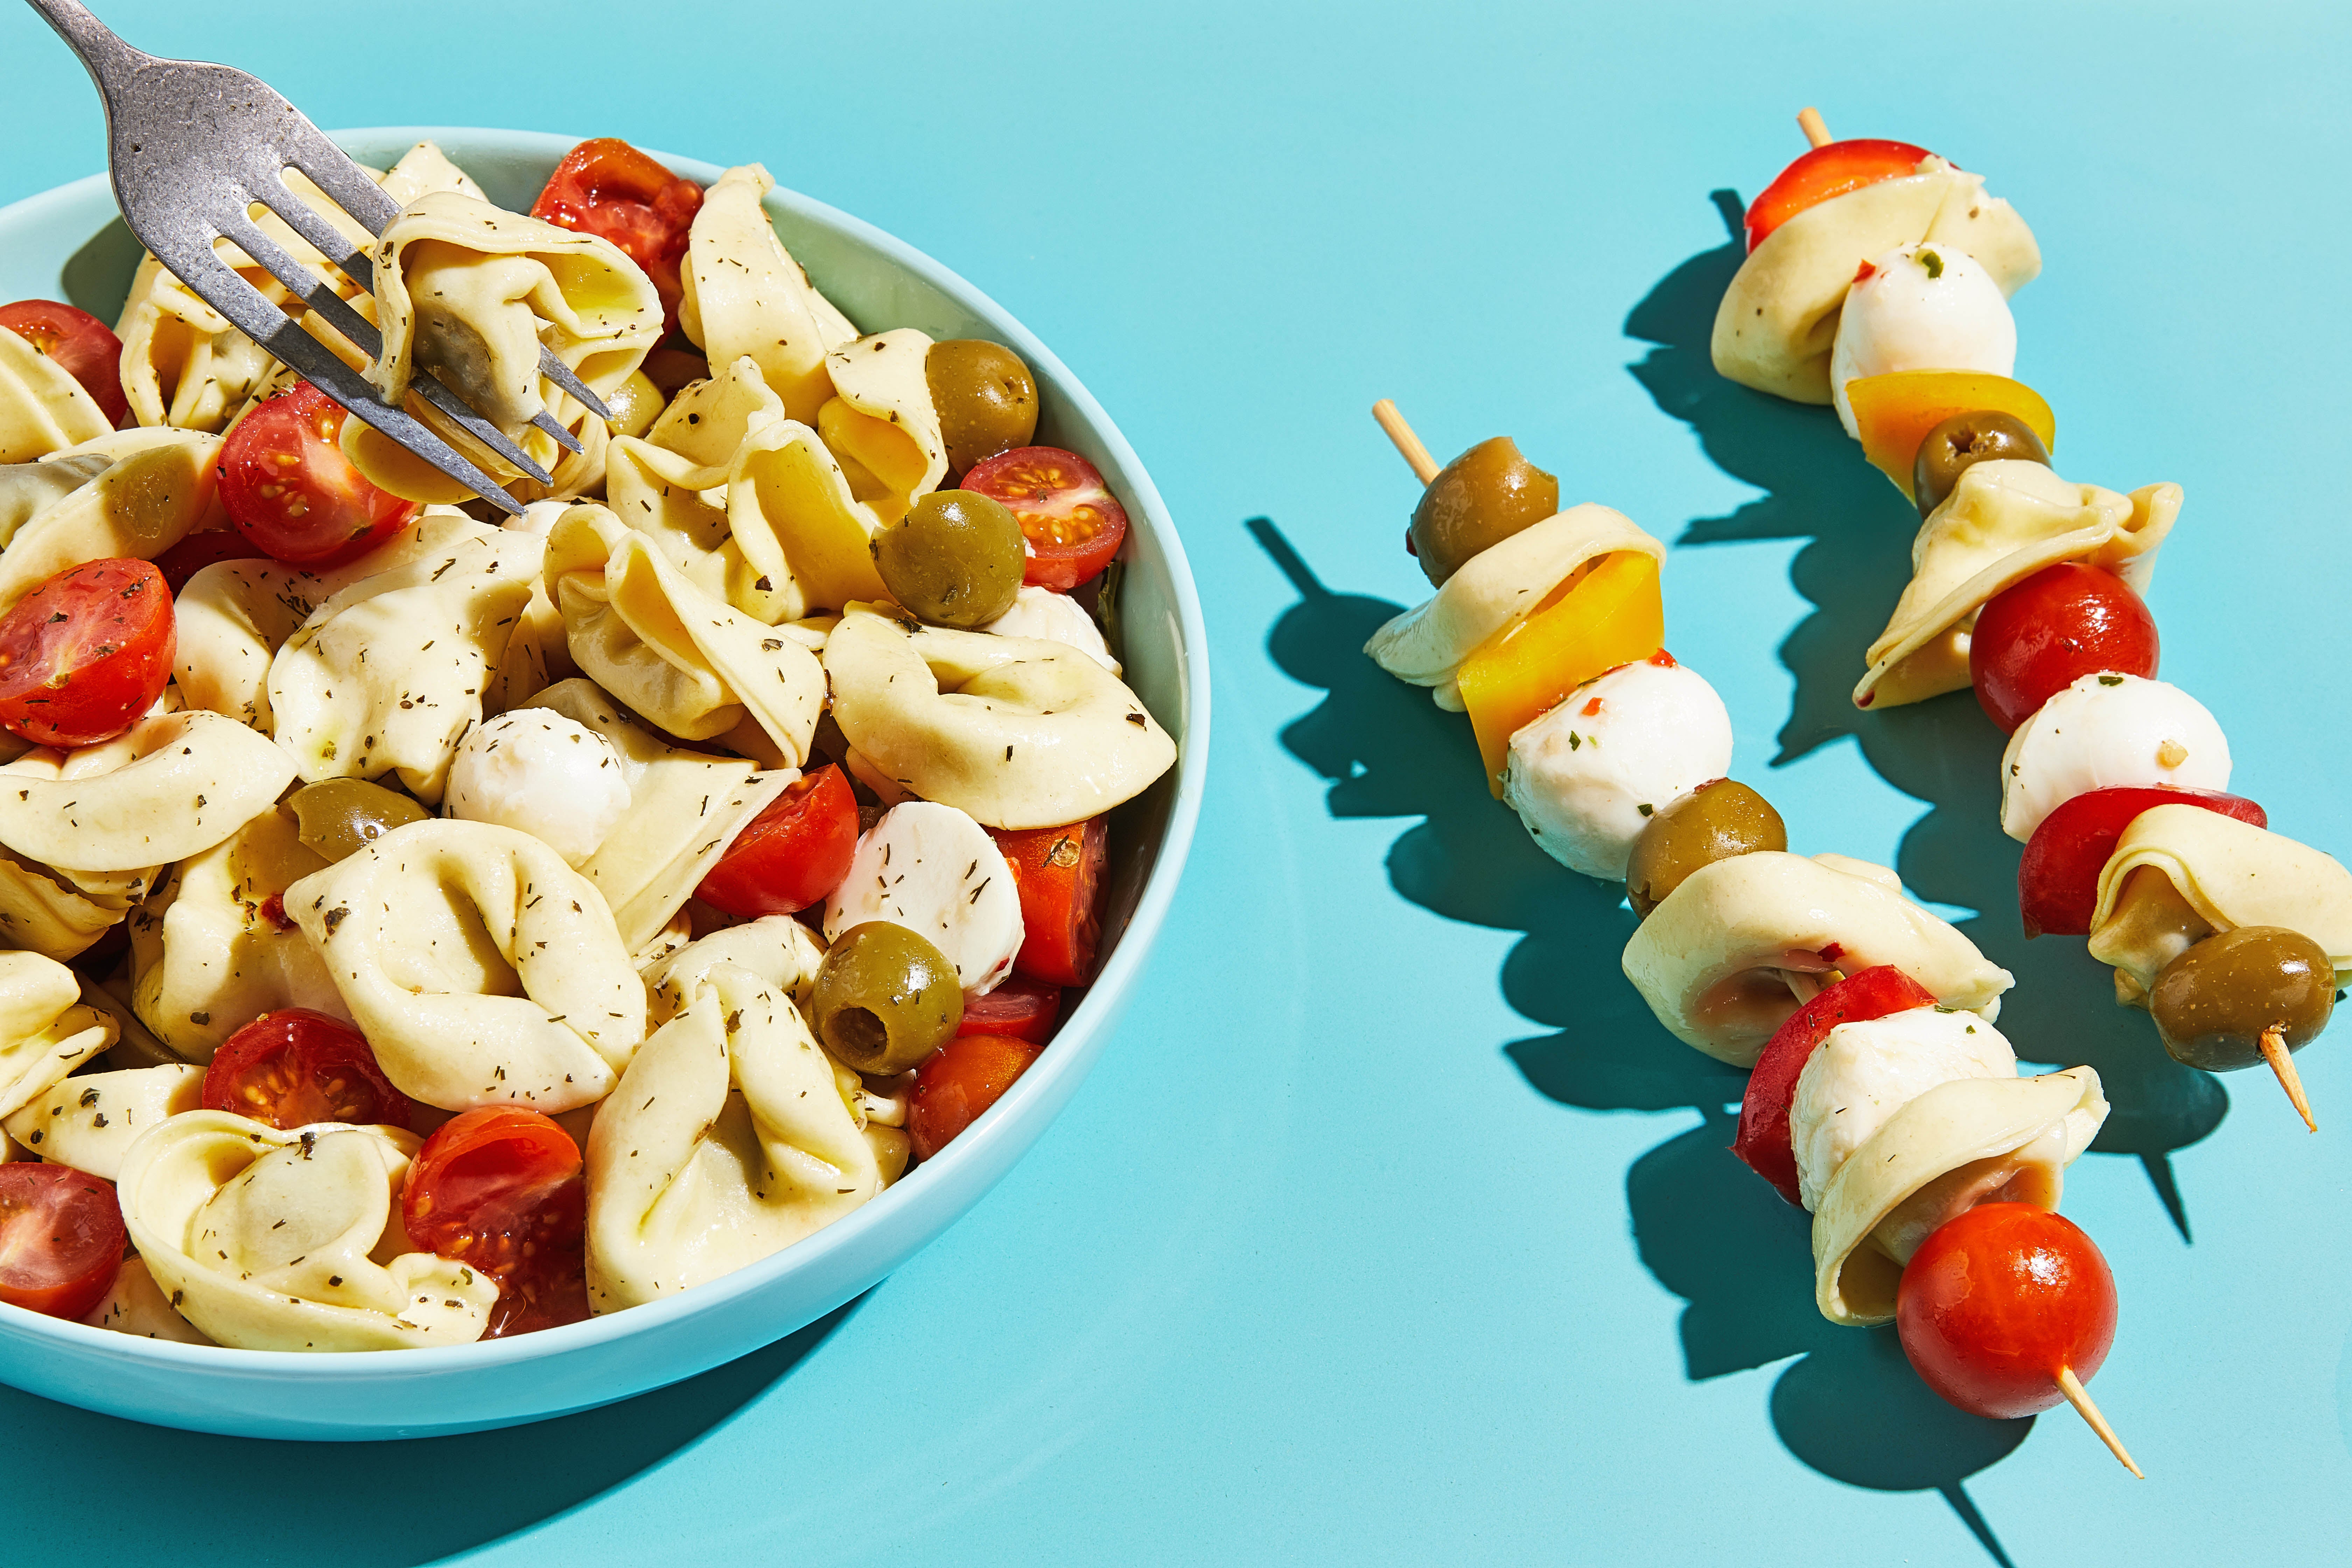 These skewers might persuade picky-eaters to finish their veggies